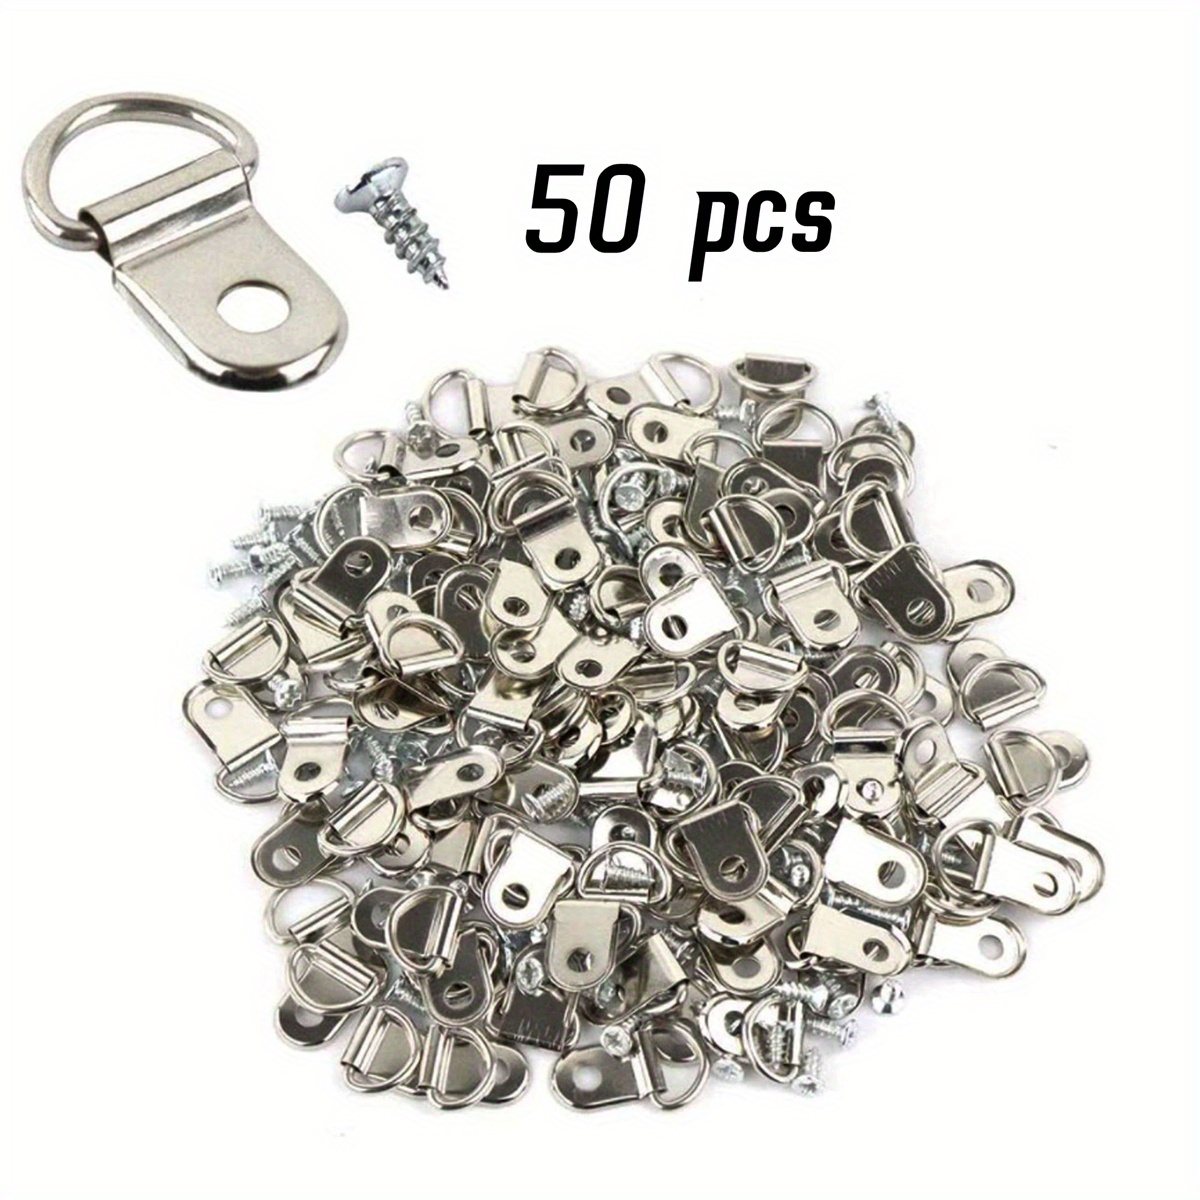 50pcs D-Ring Hangers With Screws, Picture Hanging Hardware Single Hole  Picture Hooks For Hanging Paintings, Mirror, Clock, Decoration, Artwork  Picture